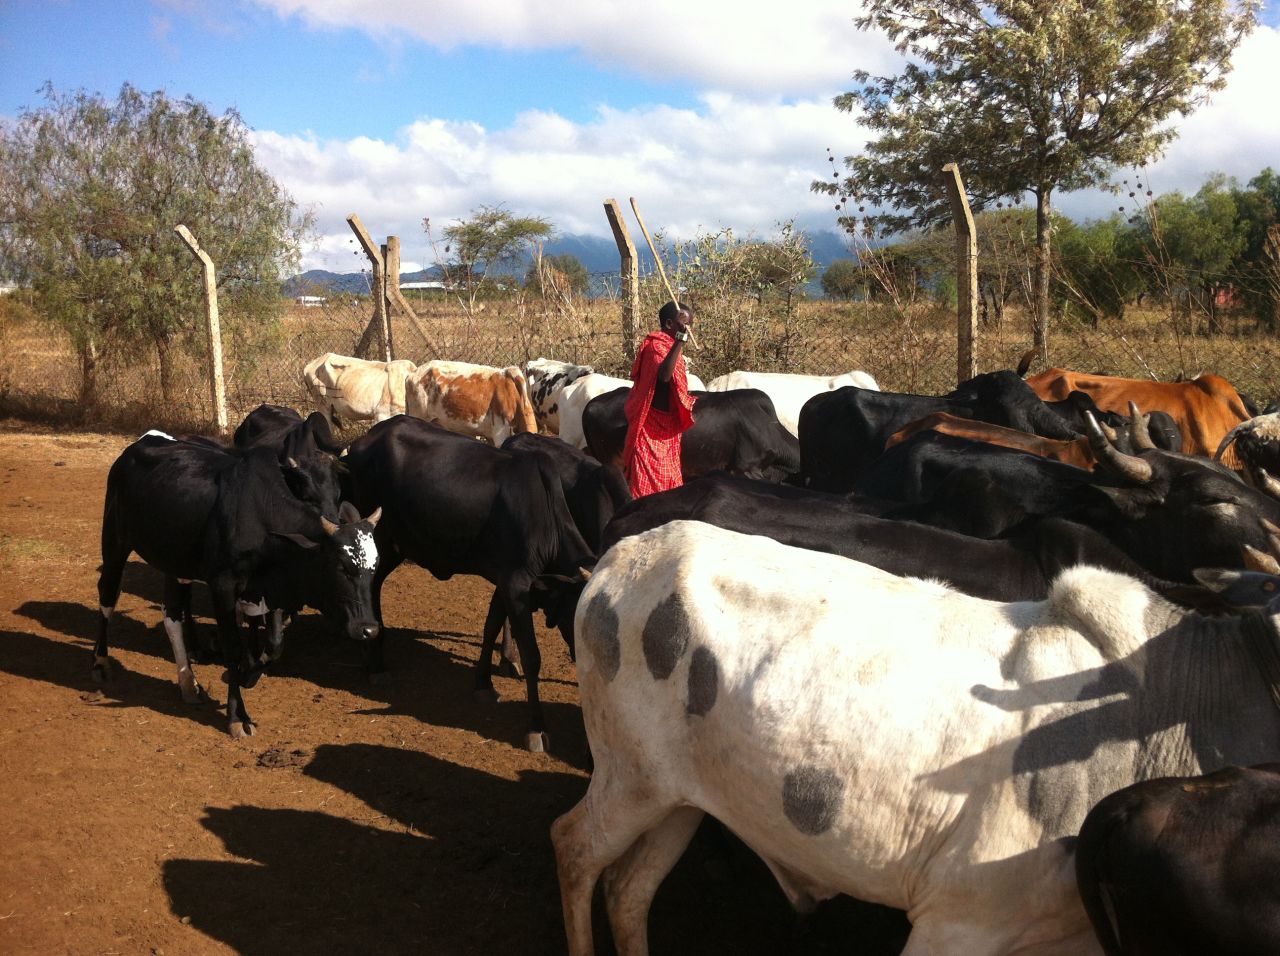 In recent years Maasai movements have decreased to only one male in a family moving with their cattle, enabling the rest of the family to become more accessible to health teams and services.